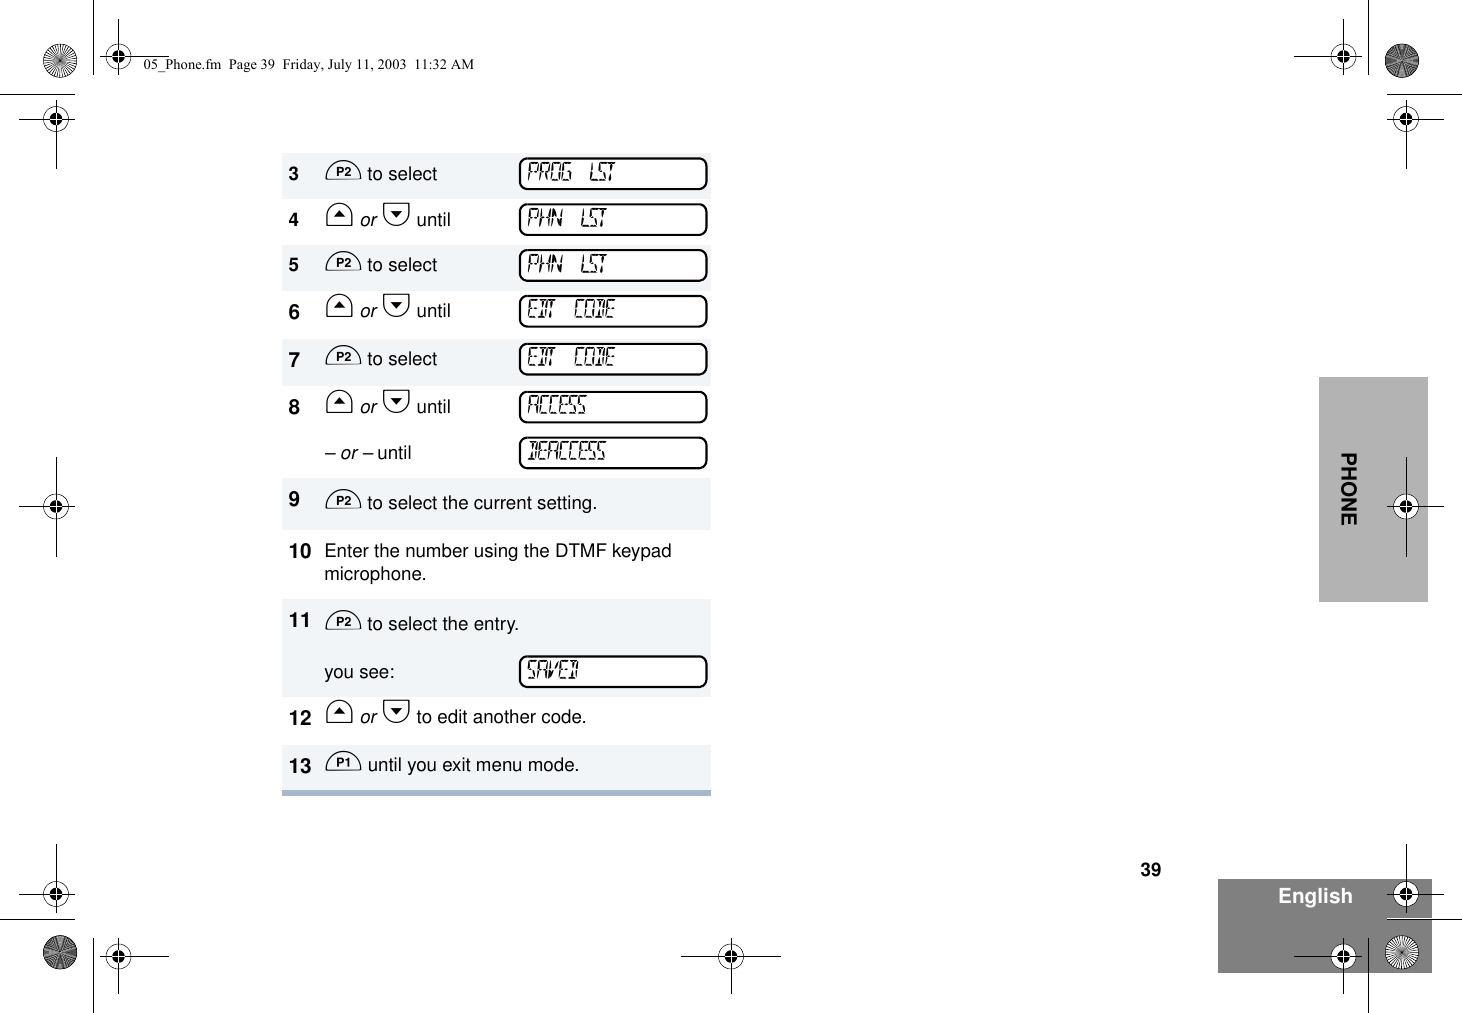 39EnglishPHONE3D to select 4G or H until5D to select6G or H until7D to select8G or H until– or – until9D to select the current setting.10 Enter the number using the DTMF keypad microphone.11 D to select the entry.you see:12 G or H to edit another code.13 C until you exit menu mode.PROG LSTPHN LSTPHN LSTEDT CODEEDT CODEACCESSDEACCESSSAVED05_Phone.fm  Page 39  Friday, July 11, 2003  11:32 AM